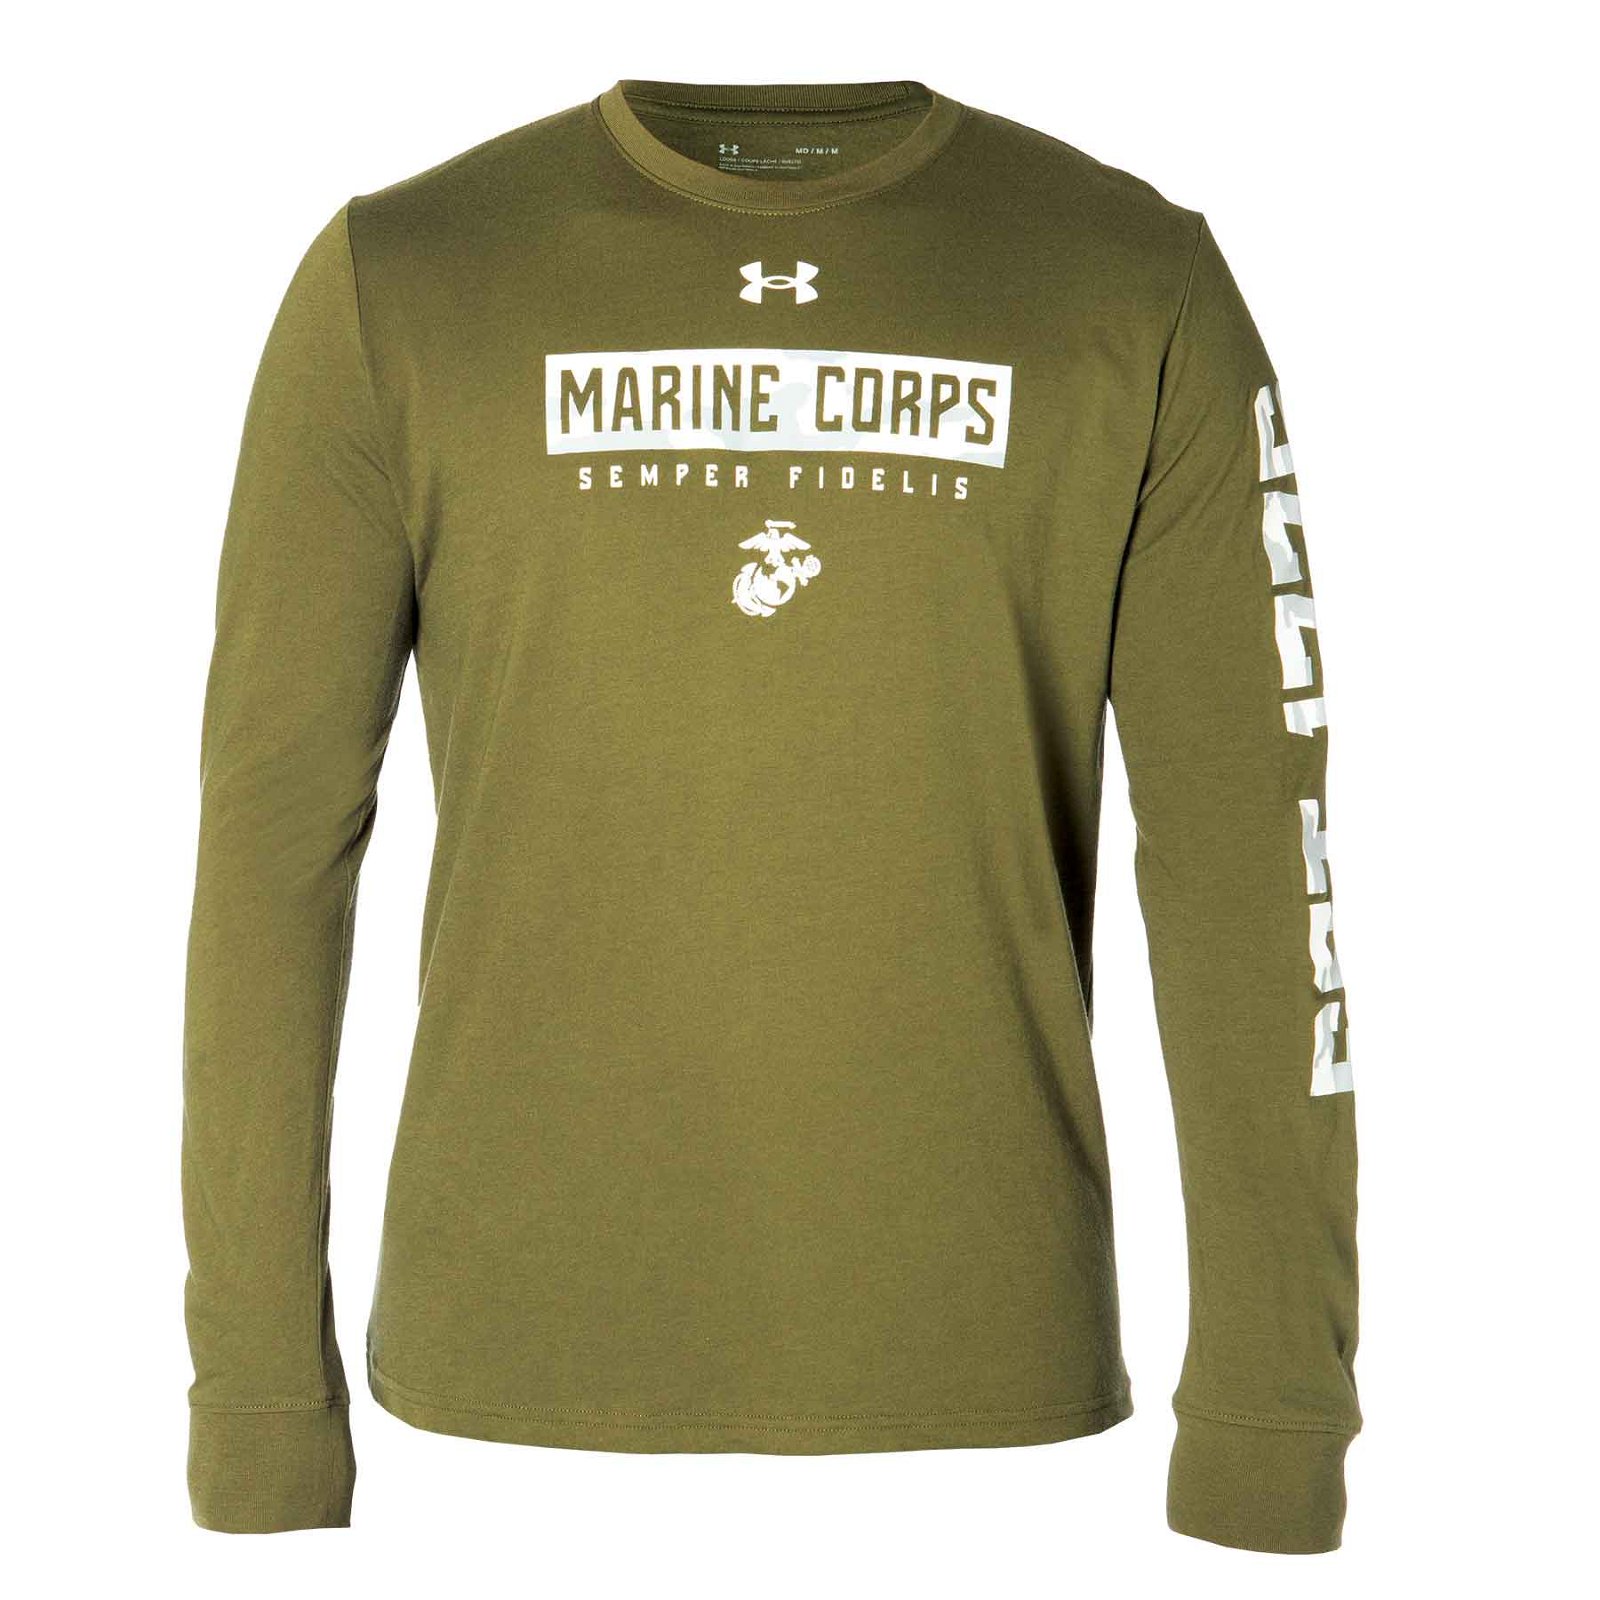 Image of Under Armour Marine Corps Semper Fidelis Long Sleeve T-shirt